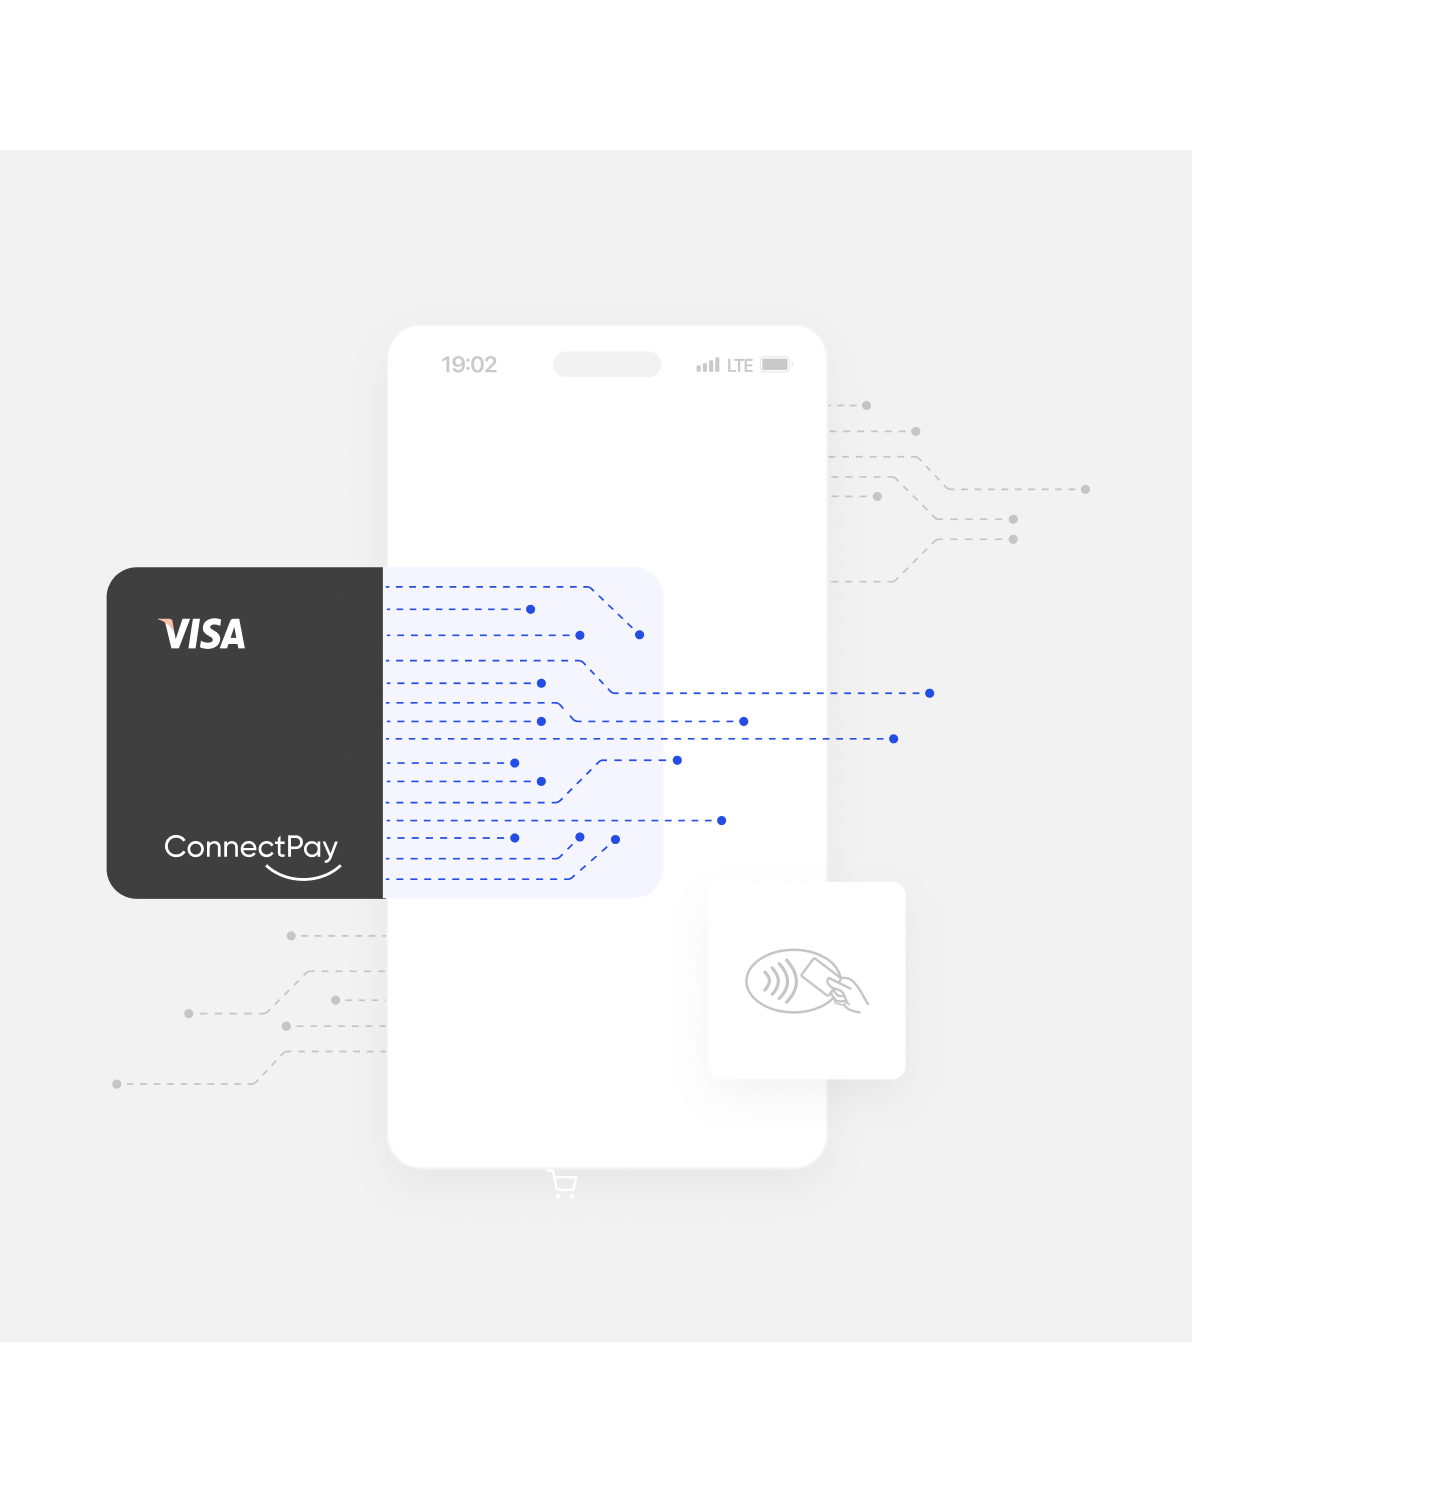 Virtual cards - a part of embedded finance